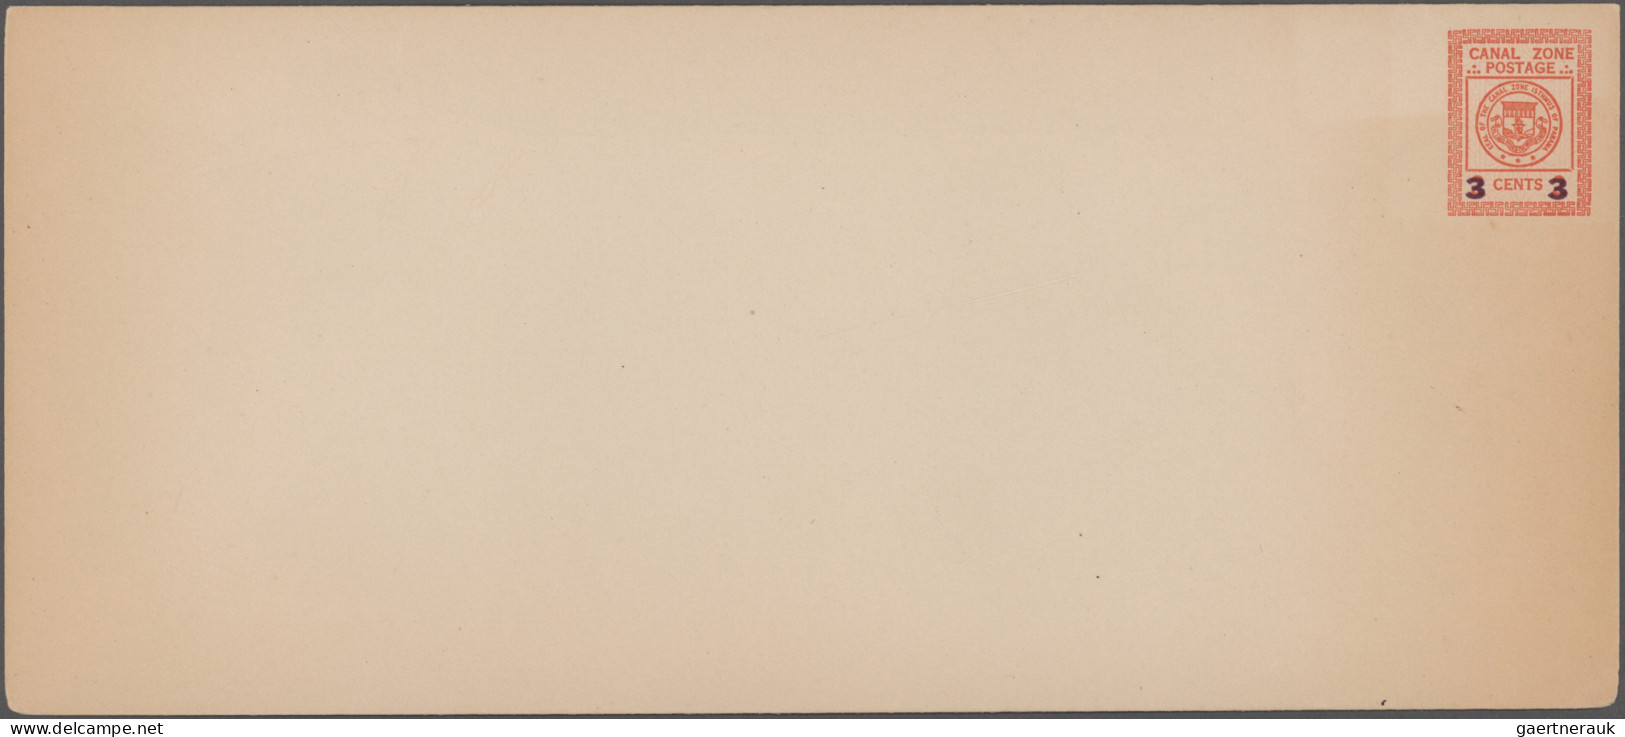 Canal Zone - Postal Stationery: 1924/1978, Balance Of Apprx. 415 (almost Exclusi - Panamá